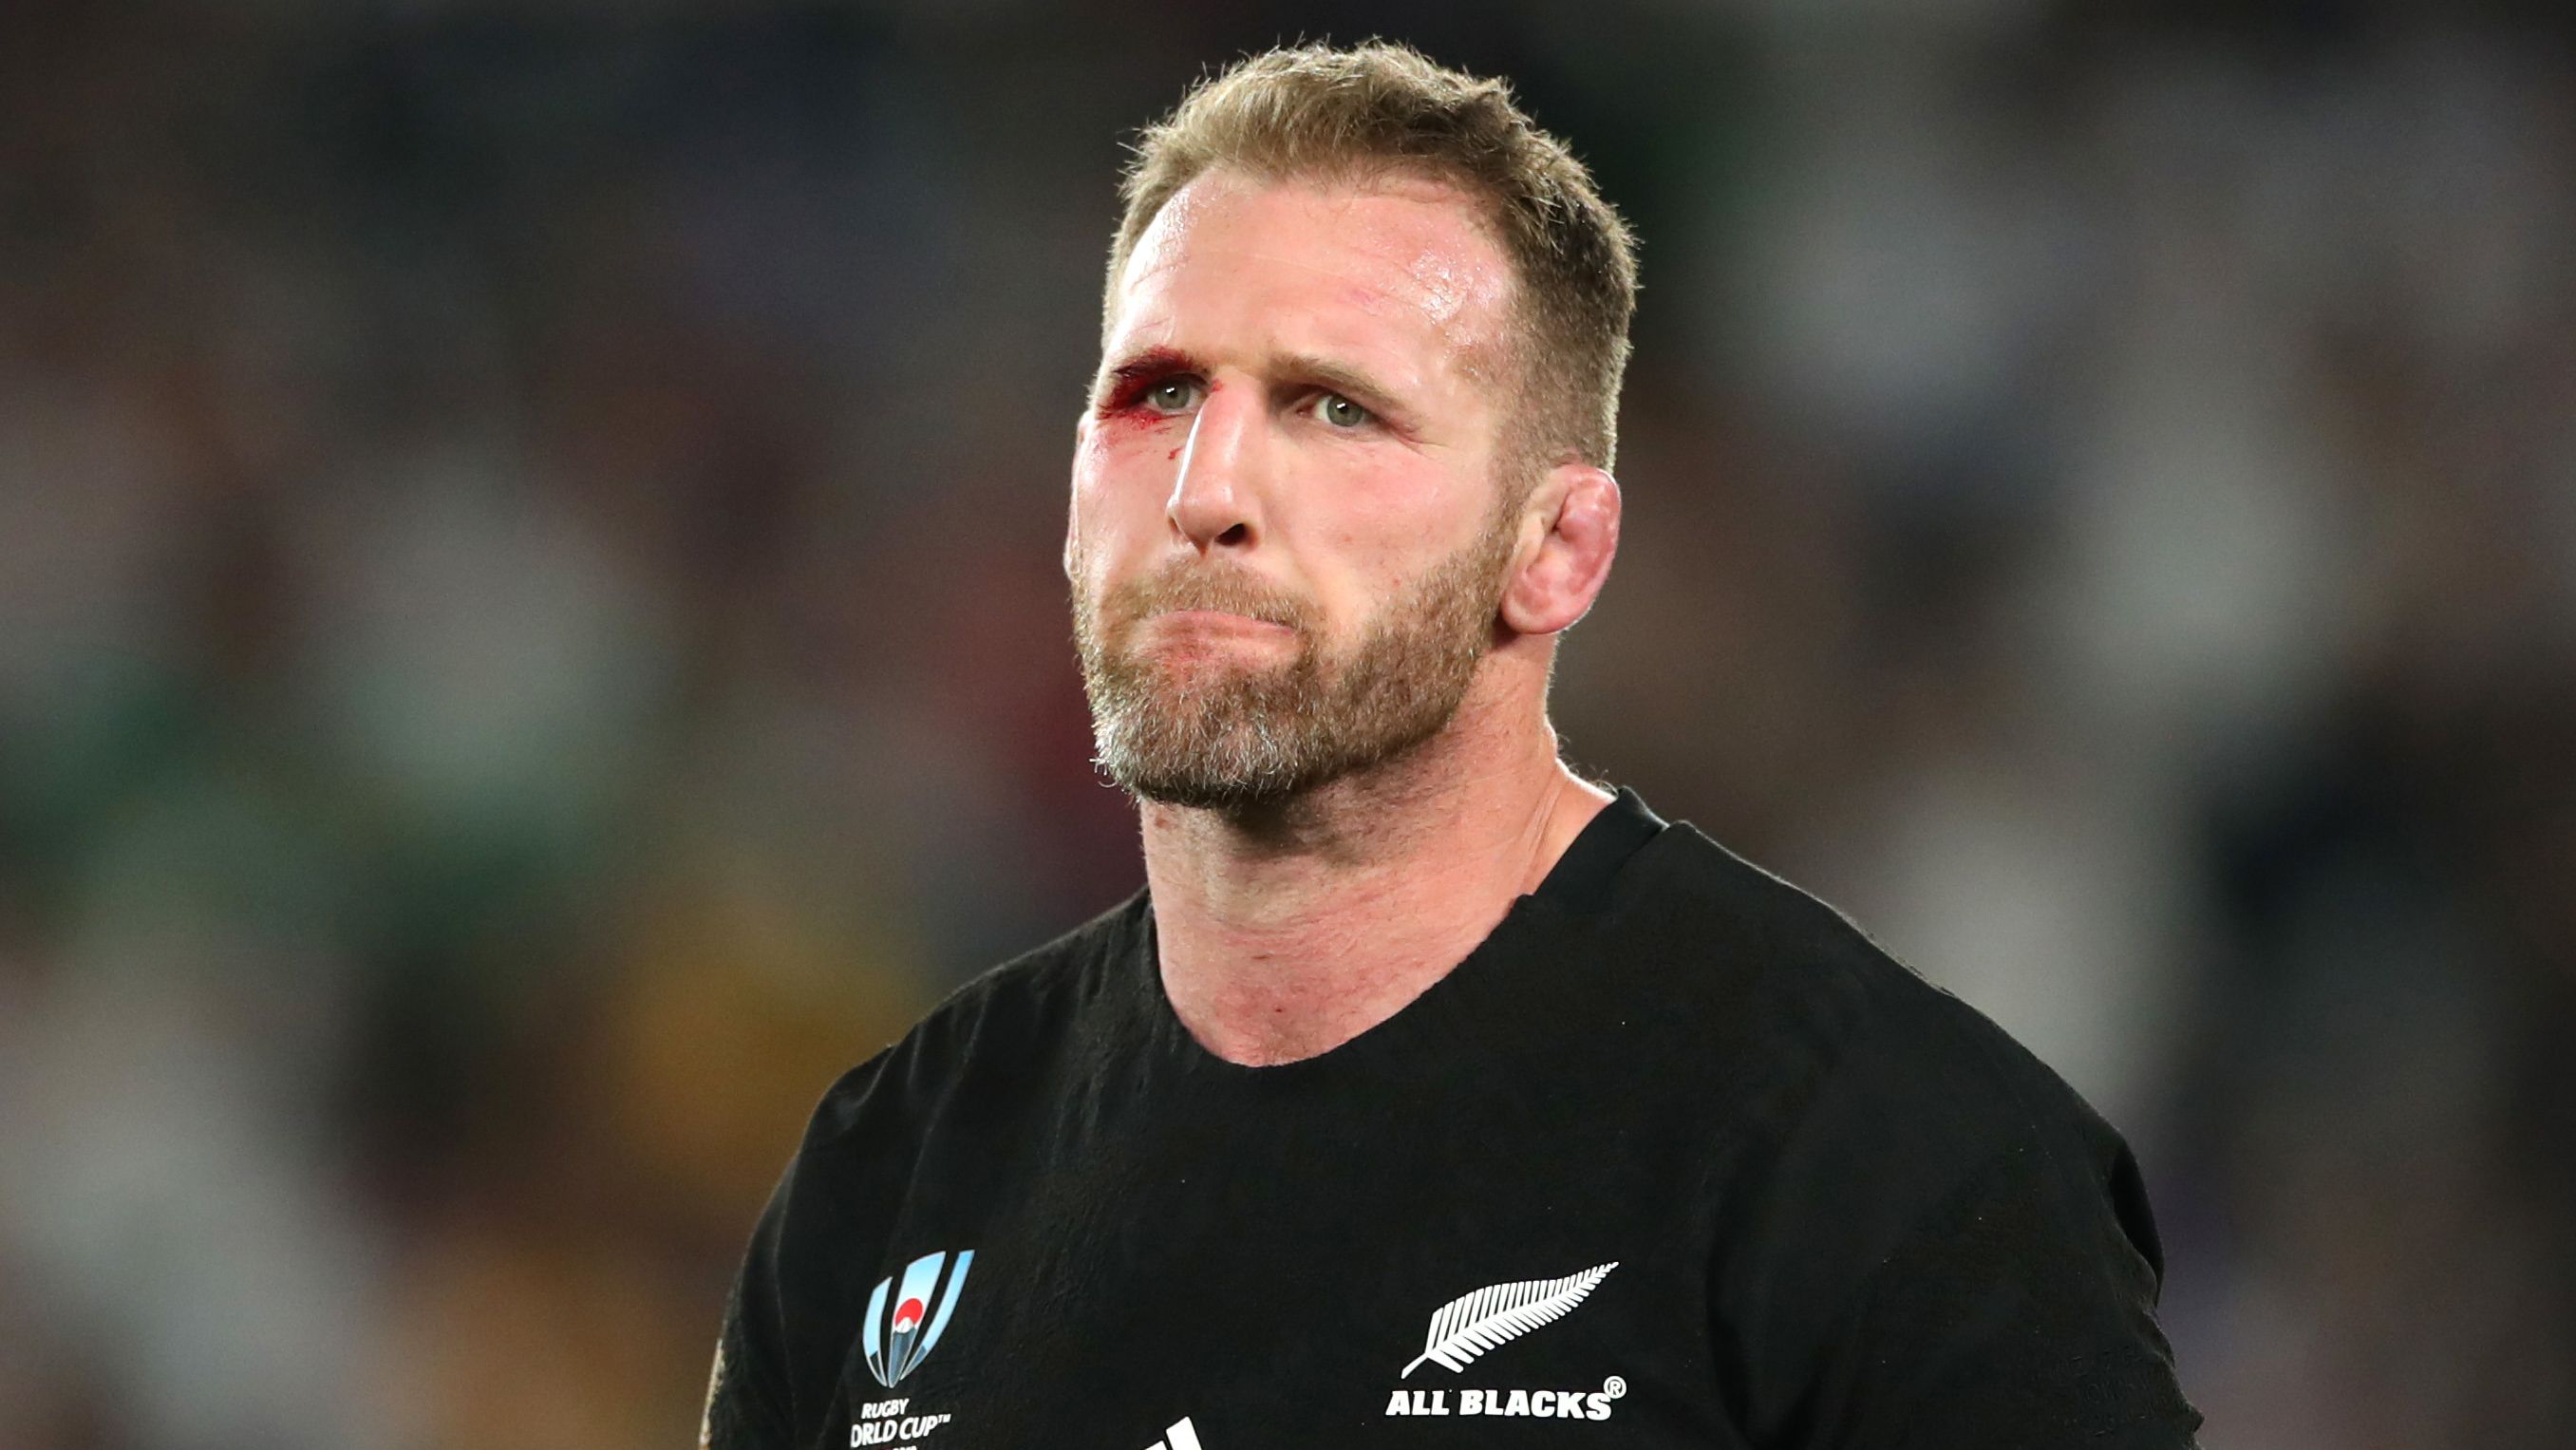 Kieran Read of New Zealand after the 2019 Rugby World Cup loss to England.